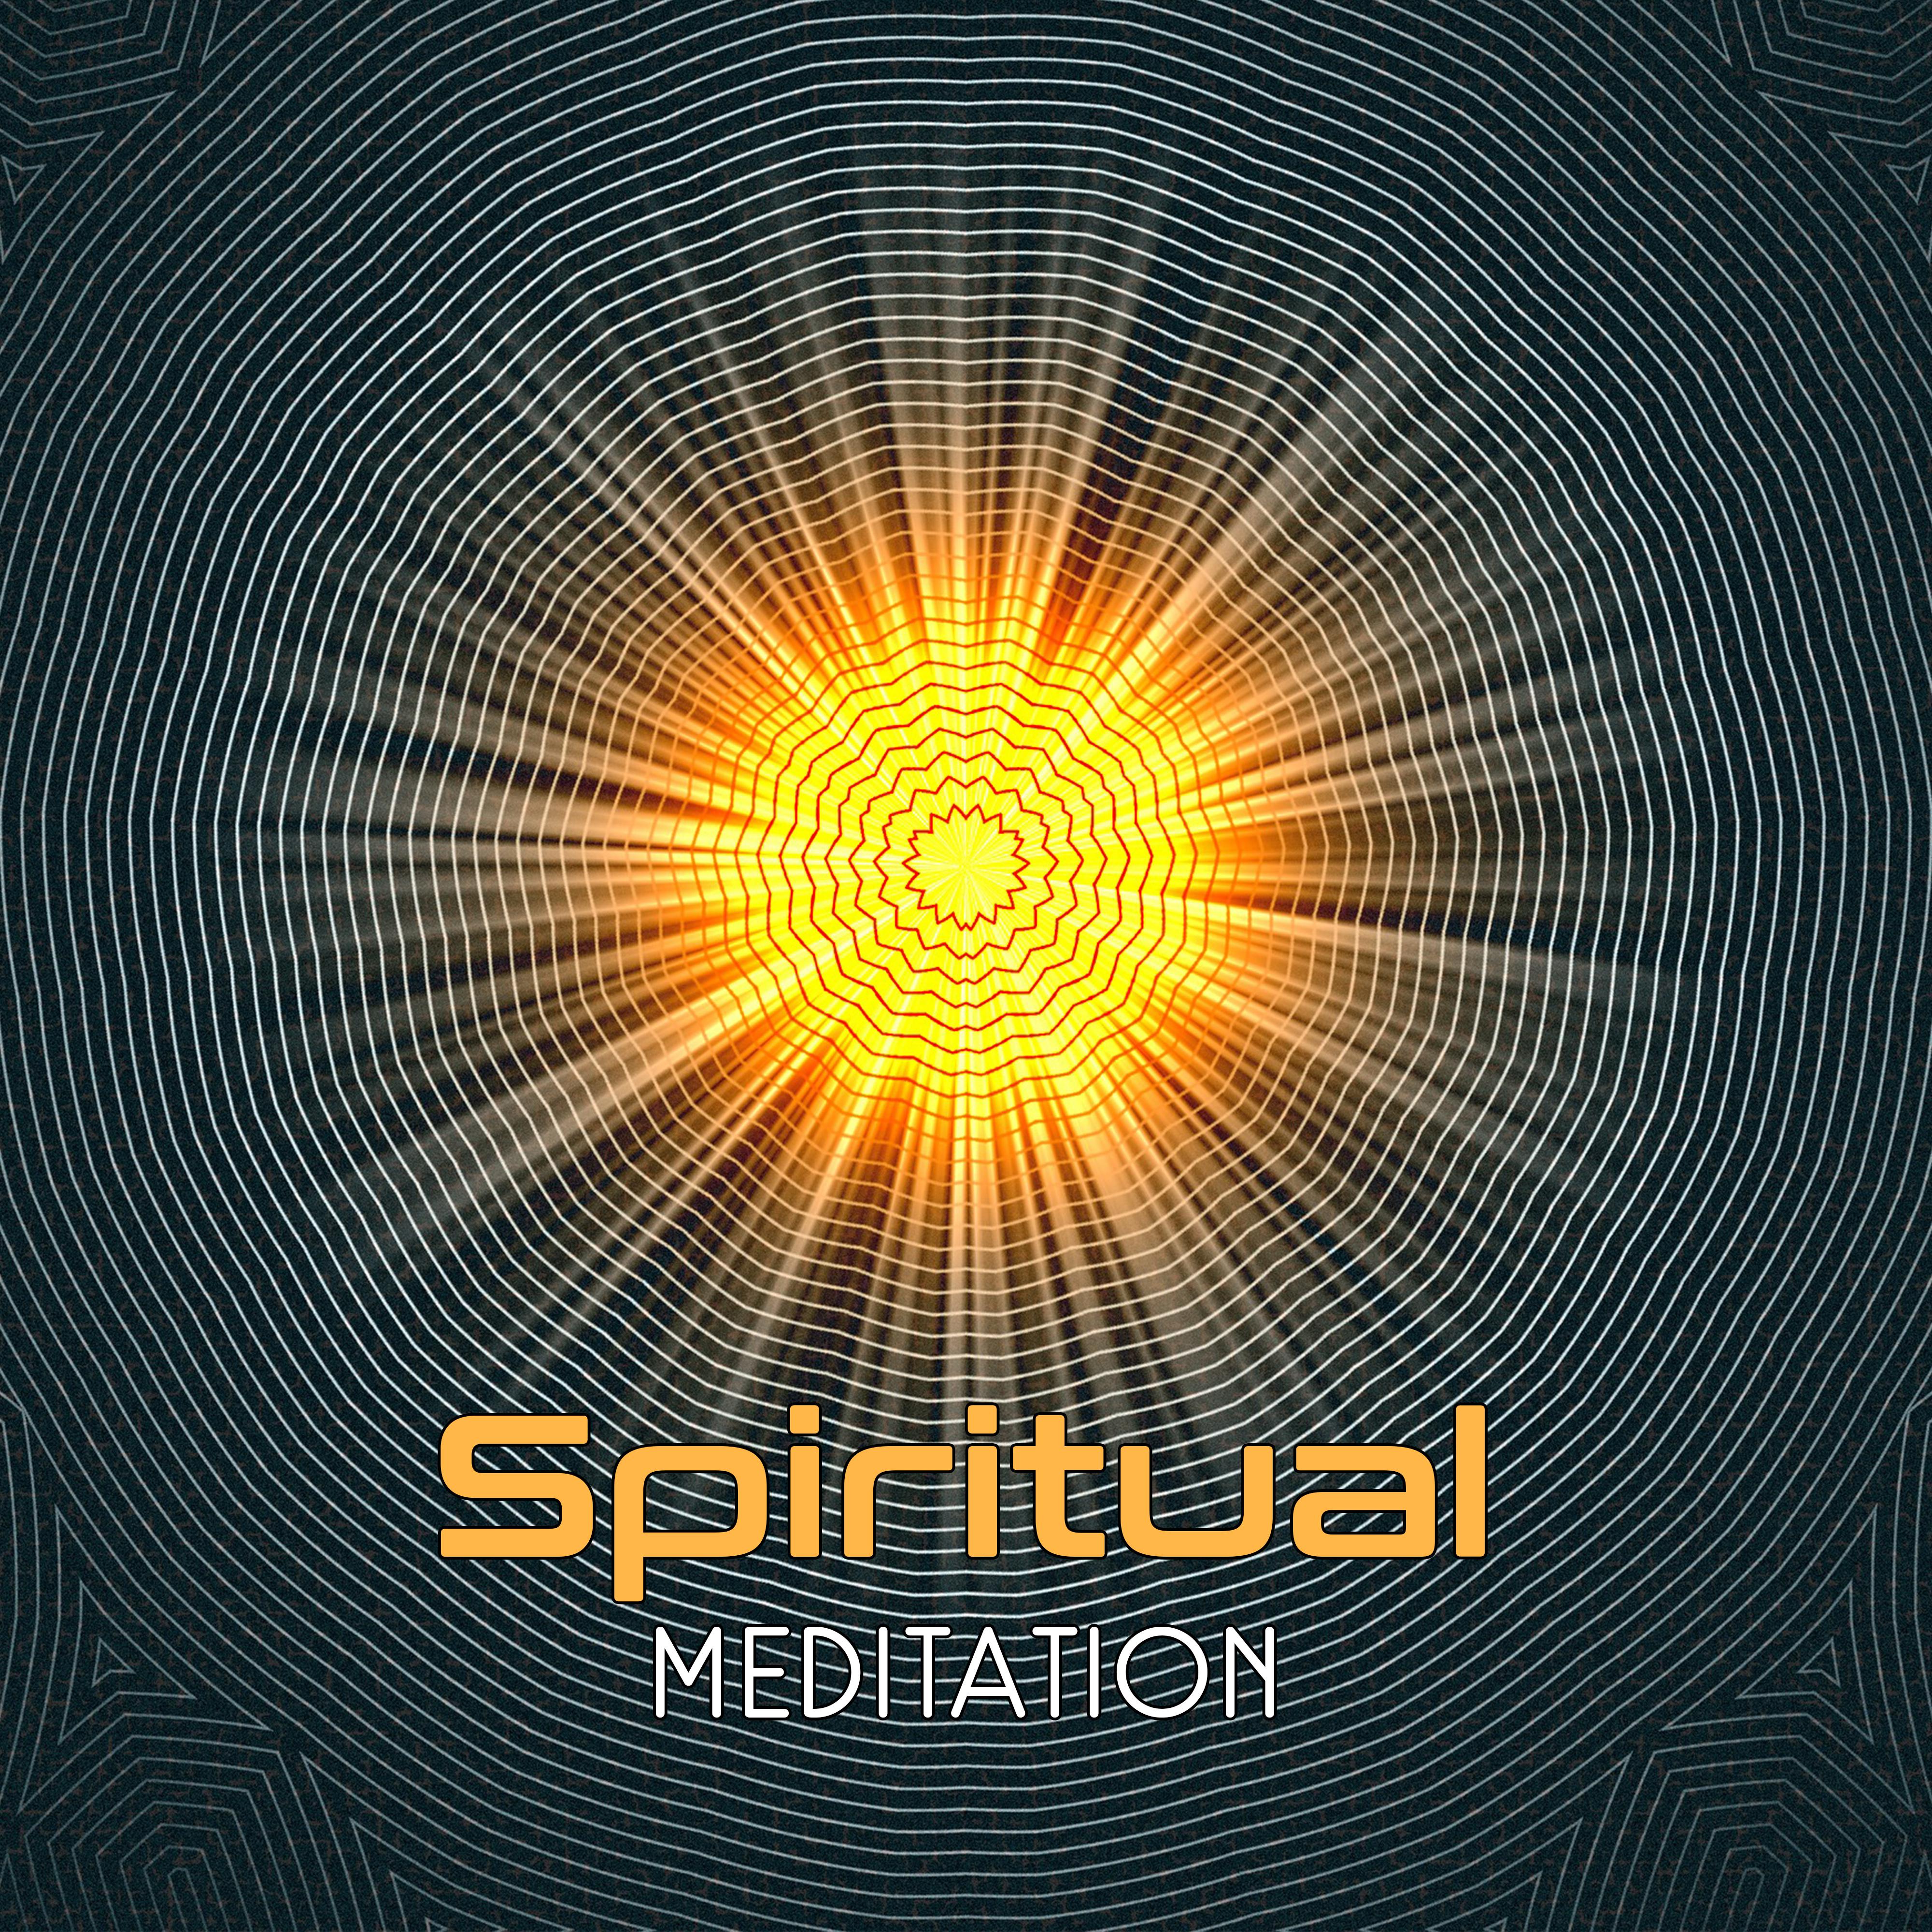 Spiritual Meditation – Spirit Free, Inner Relaxation, No More Stress, Chilled New Age